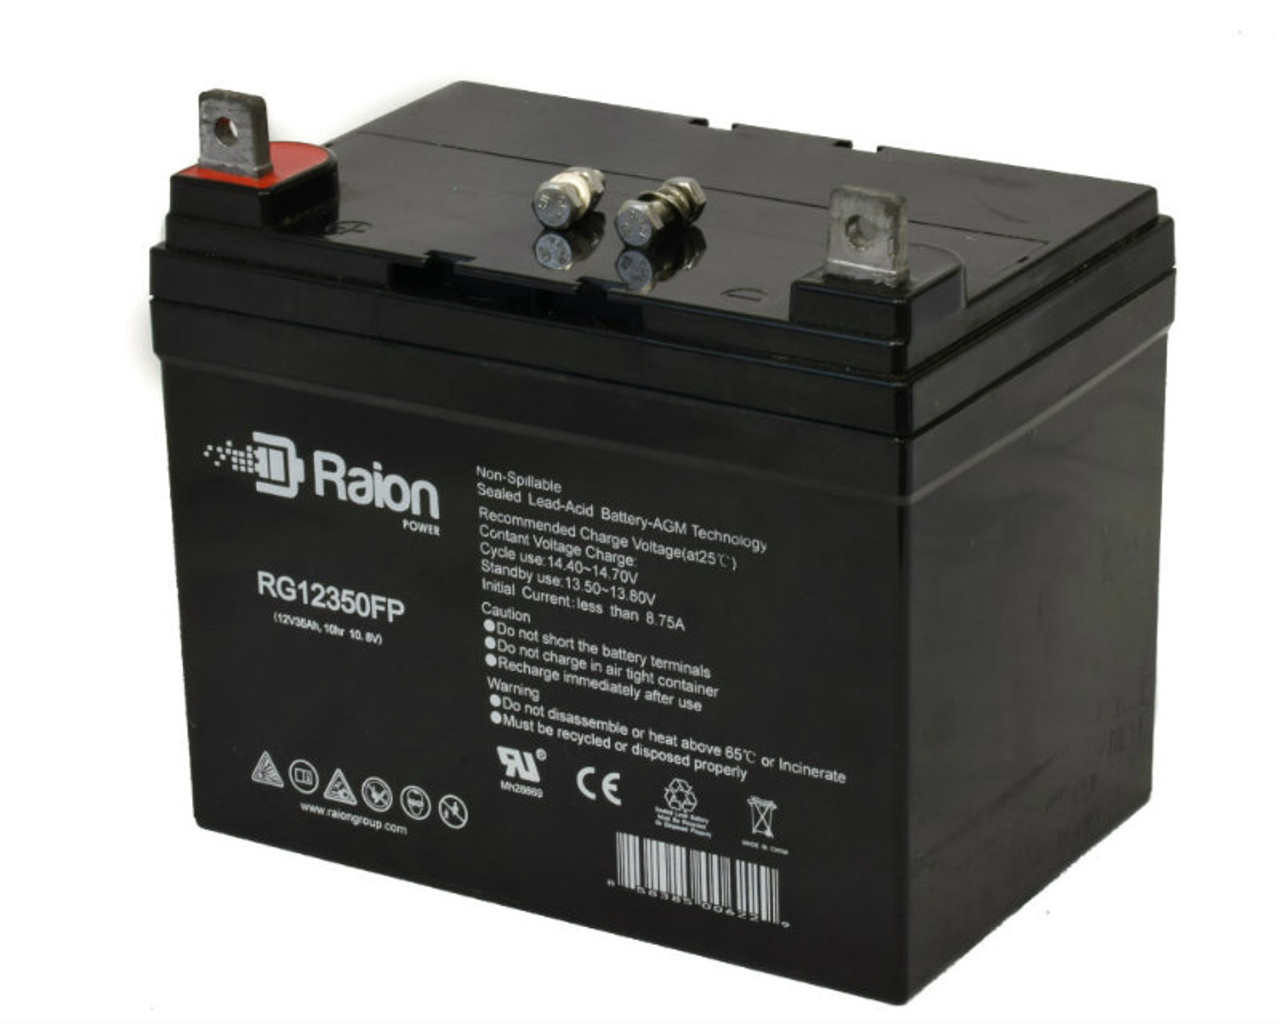 Raion Power Replacement 12V 35Ah RG12350FP Battery for Agco Allis 1718H